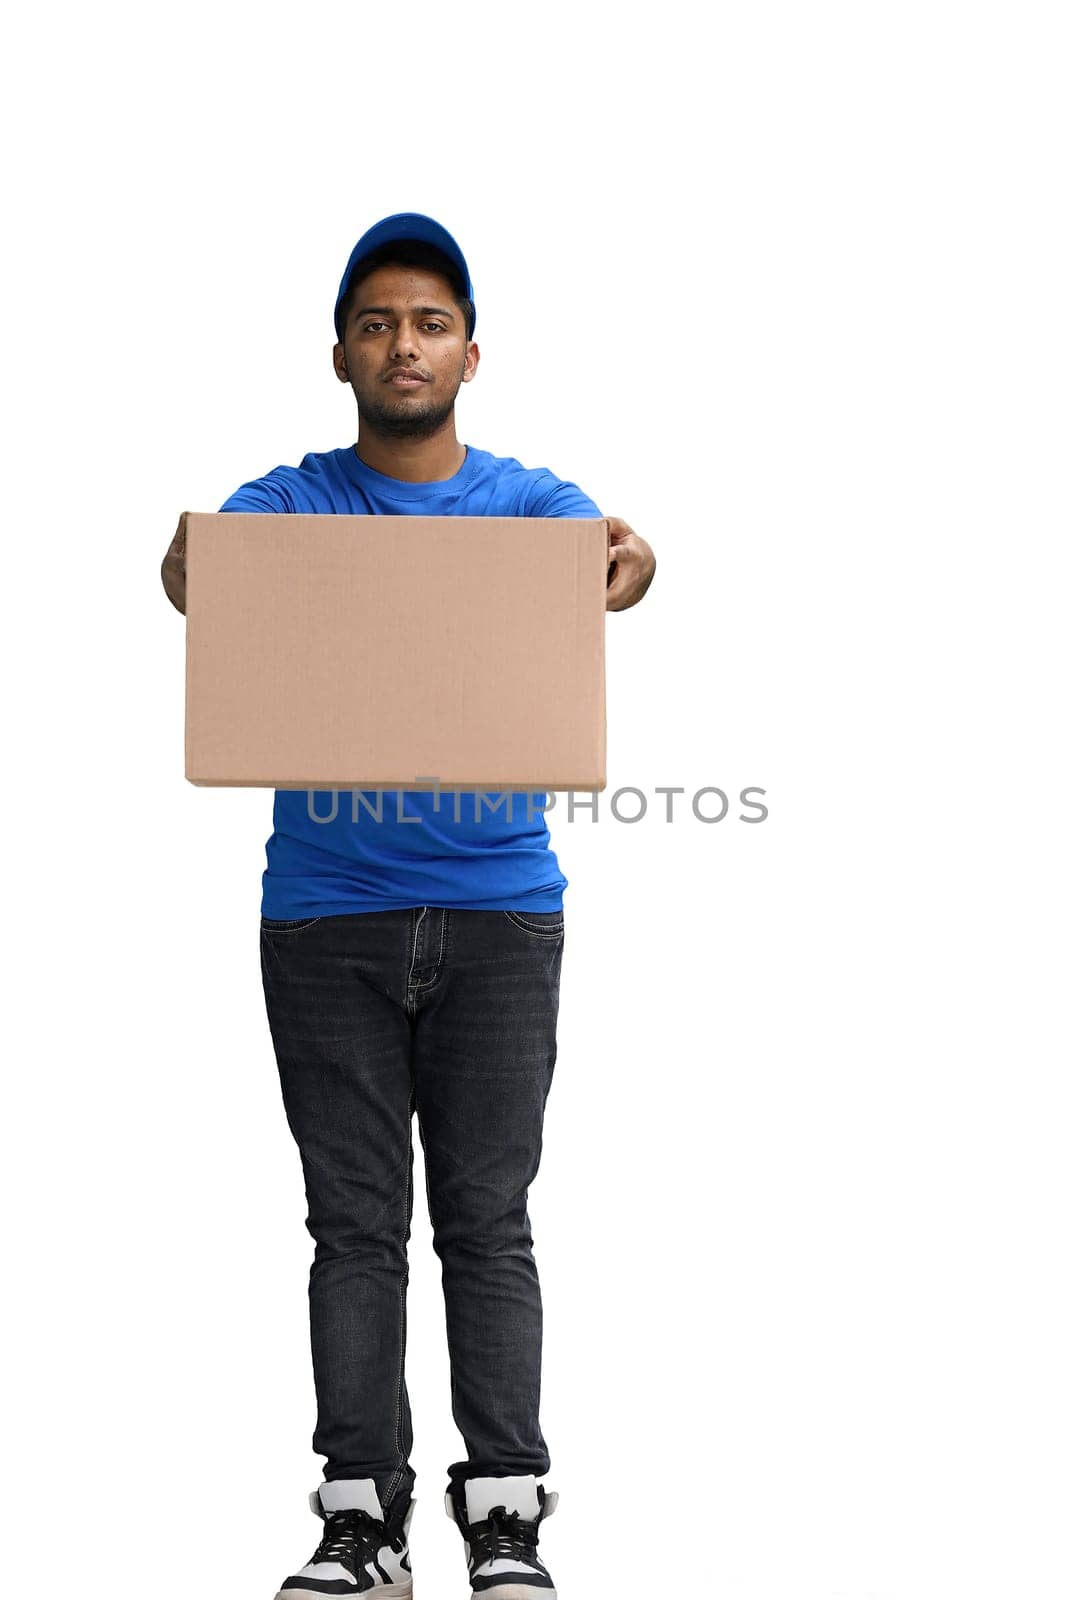 A man on a white background give box.